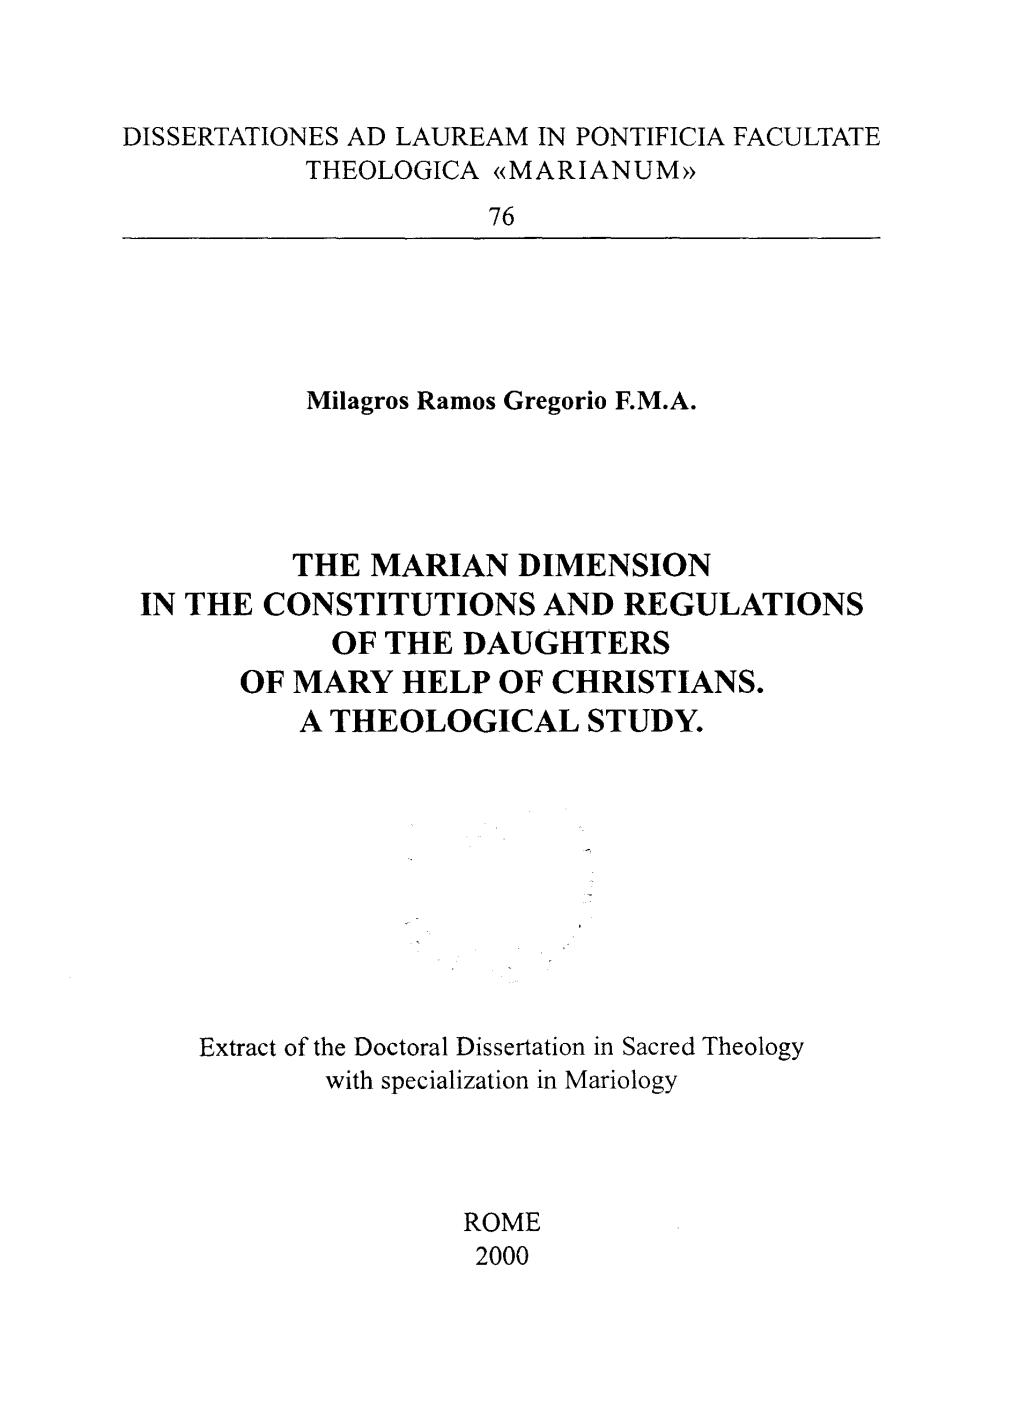 The Marian Dimension in the Constitutions and Regulations of the Daughters of Mary Help of Christians